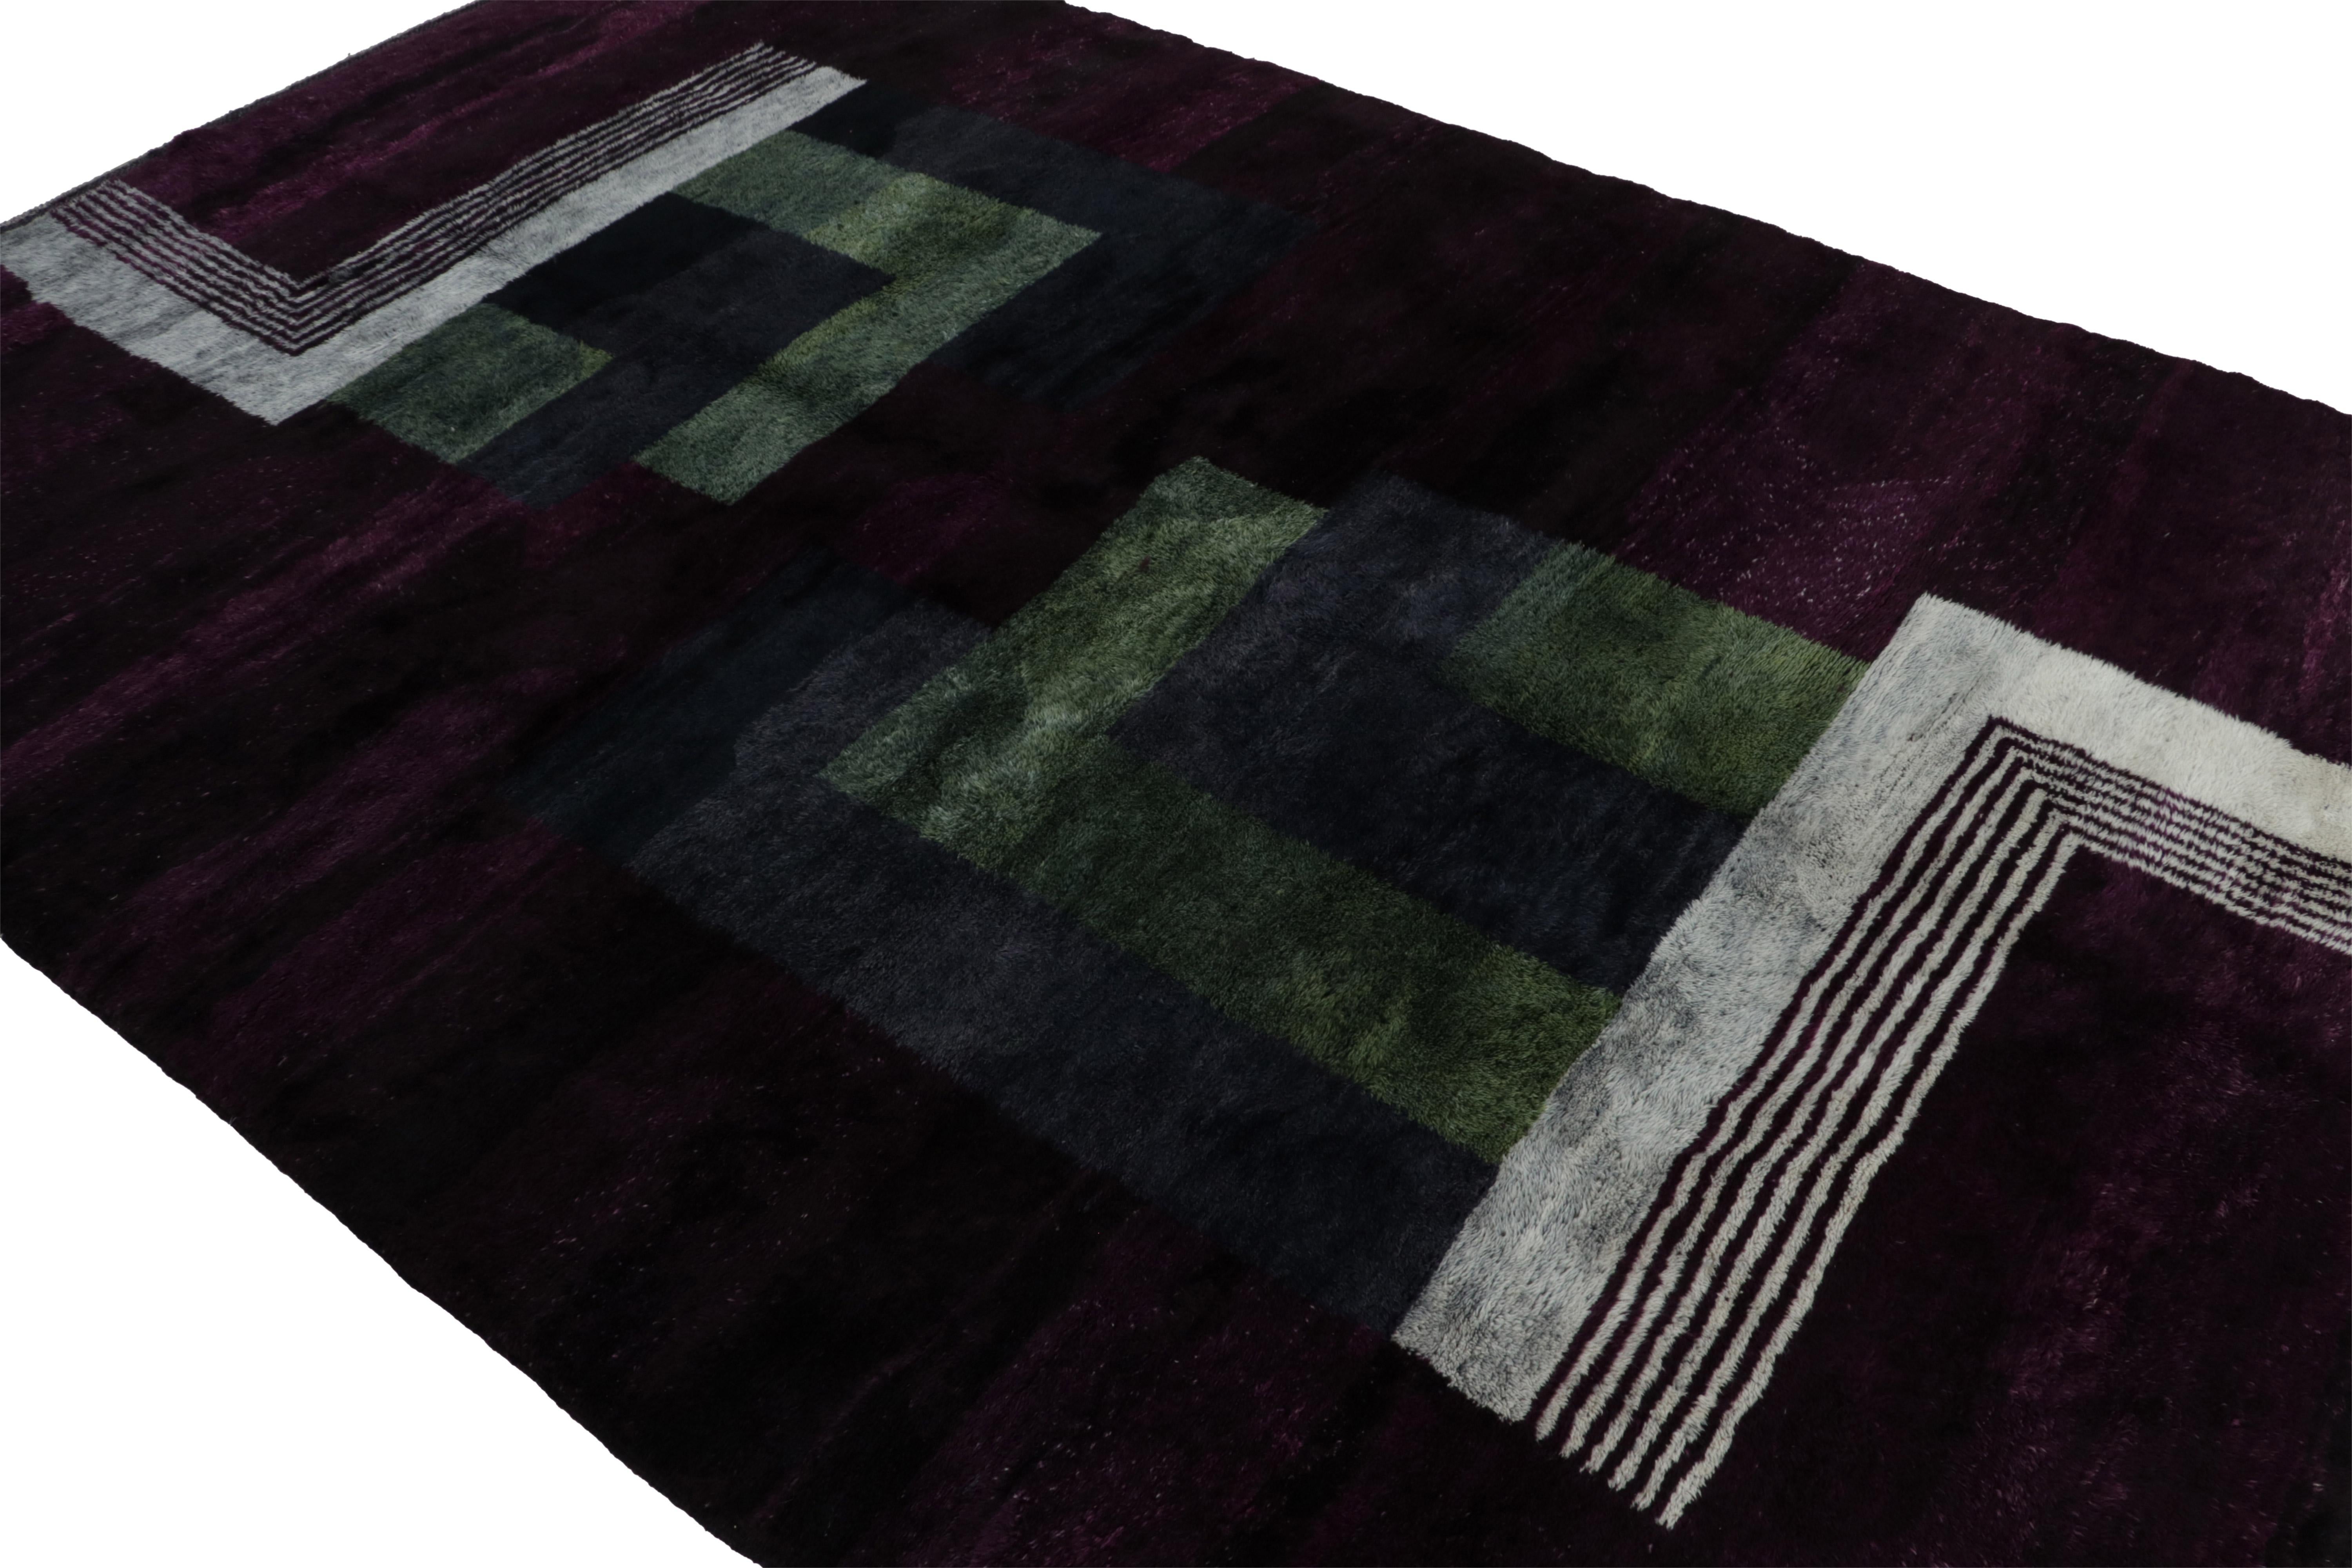 This hand-knotted wool 7x10 Moroccan rug by Rug & Kilim represents an exciting new line of modern tribal rugs. Its design plays Art Deco-style geometric patterns with the lush pile texture and primitivist feel of the Berber tradition.

On the